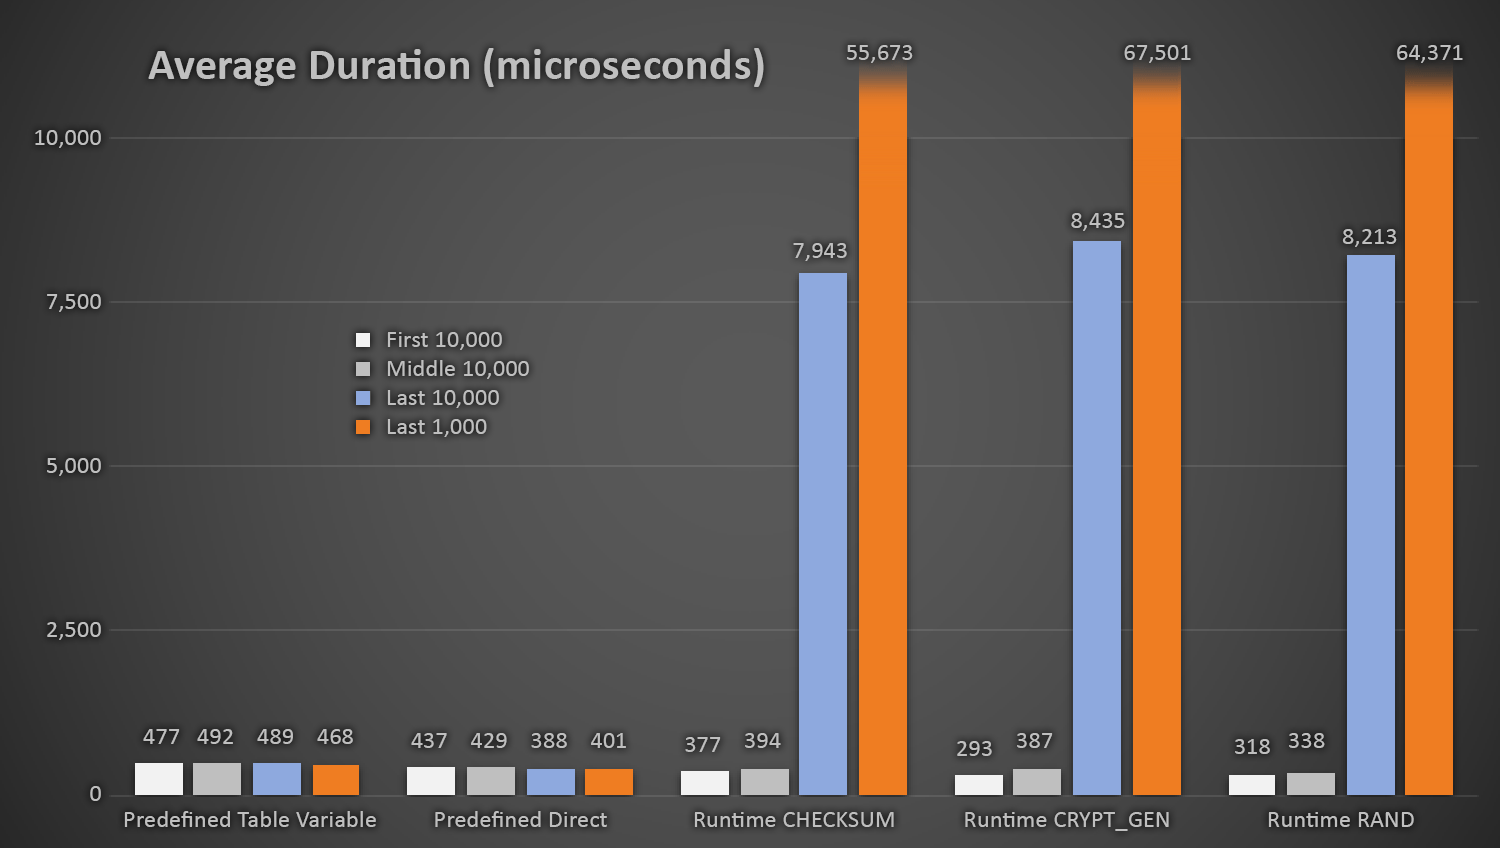 Average duration (in microseconds) of random generation using different approaches